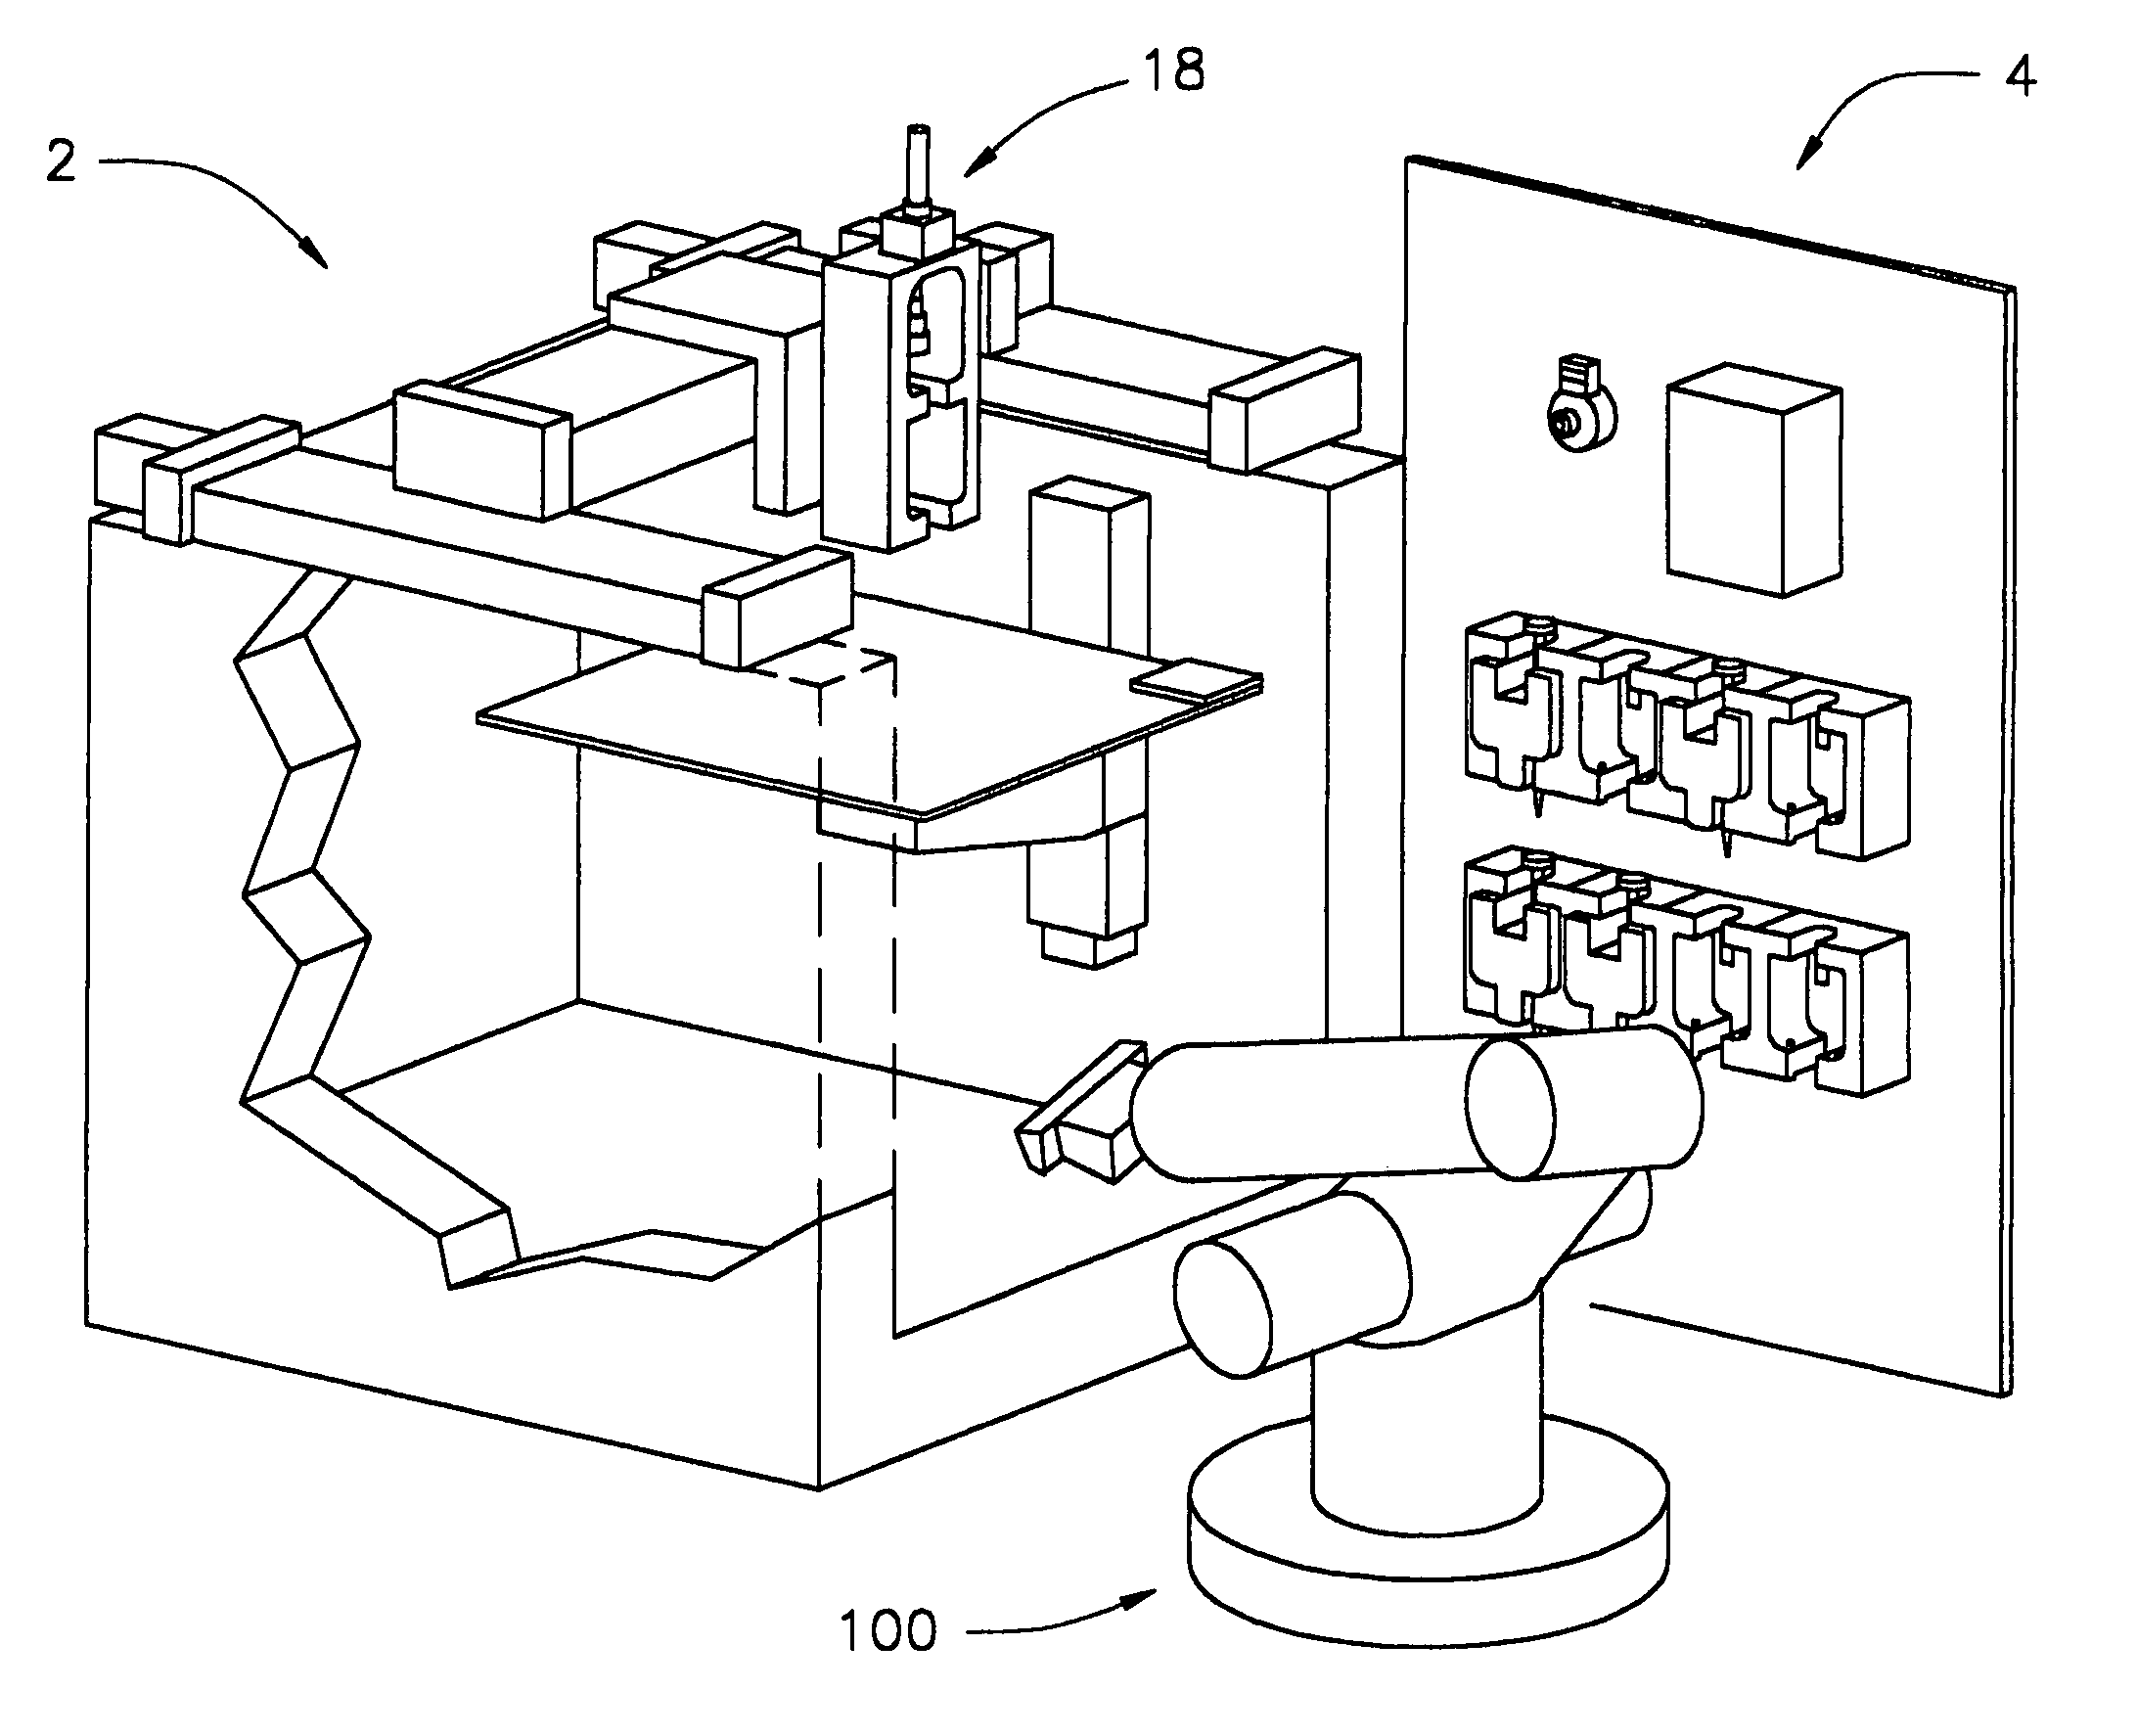 Modular fabrication systems and methods